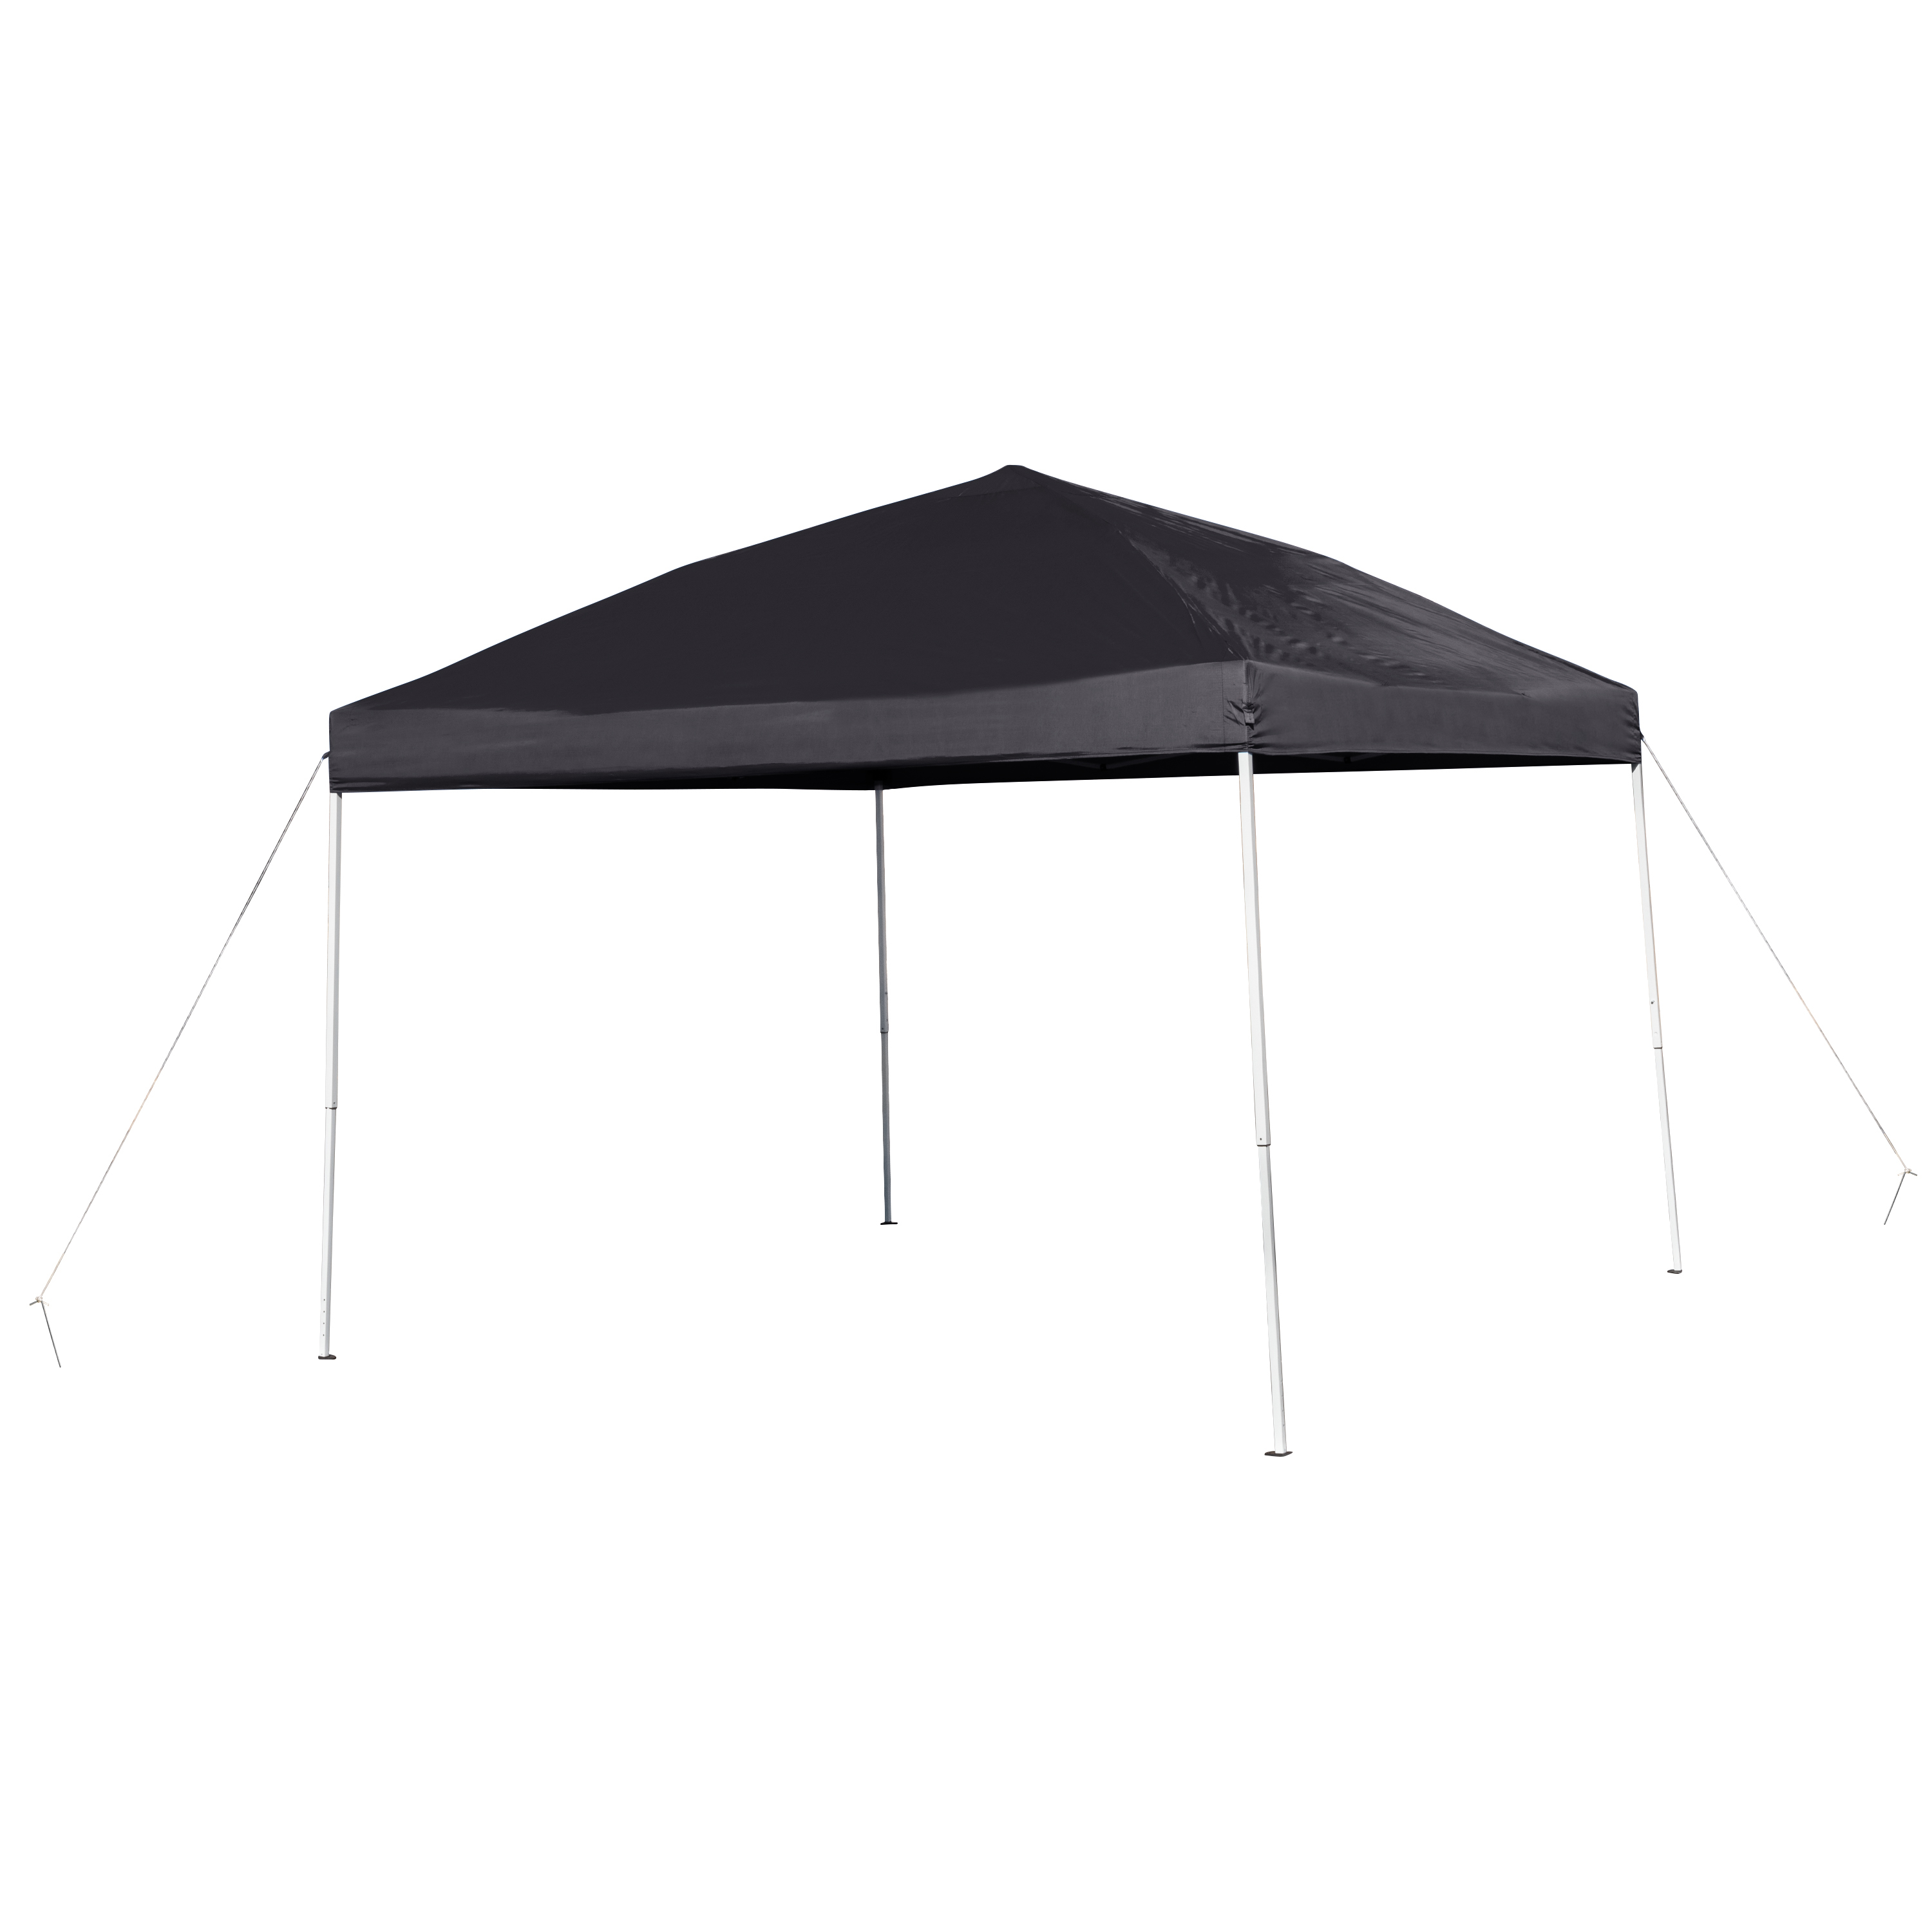 Flash Furniture JJ-GZ1010-BK-GG 10' x 10' Black Outdoor Pop Up Slanted Leg Canopy Tent with Carry Bag